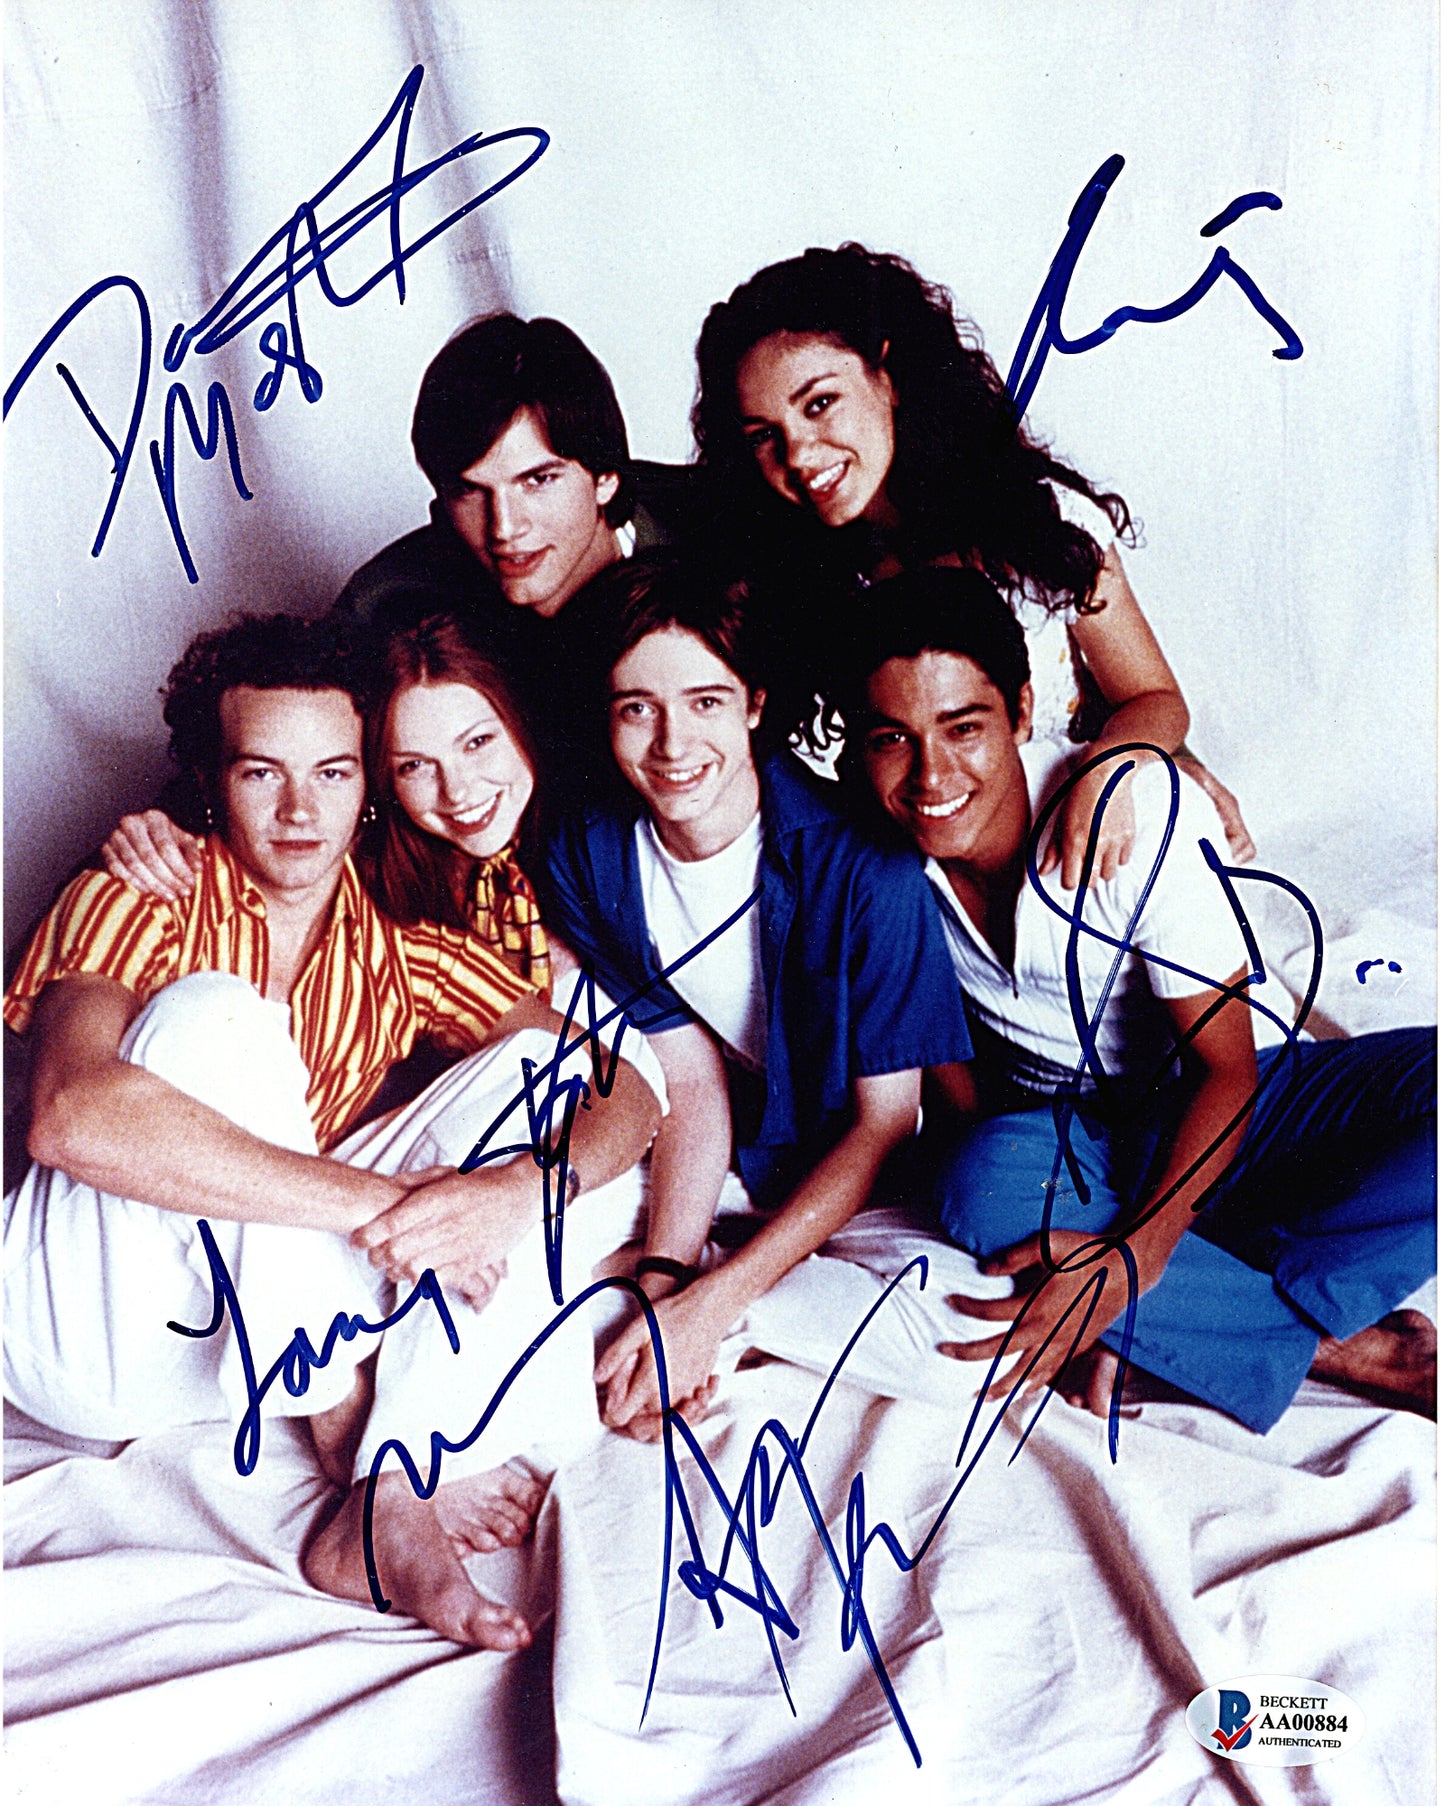 Hollywood- Autographed- That 70s Show Signed 8x10 Photo Featuring All 6 - Ashton Kutcher, Mila Kunis, WIlmer Valderrama, Topher Grace, Laura Prepon, Danny Masterson Beckett BAS 103a